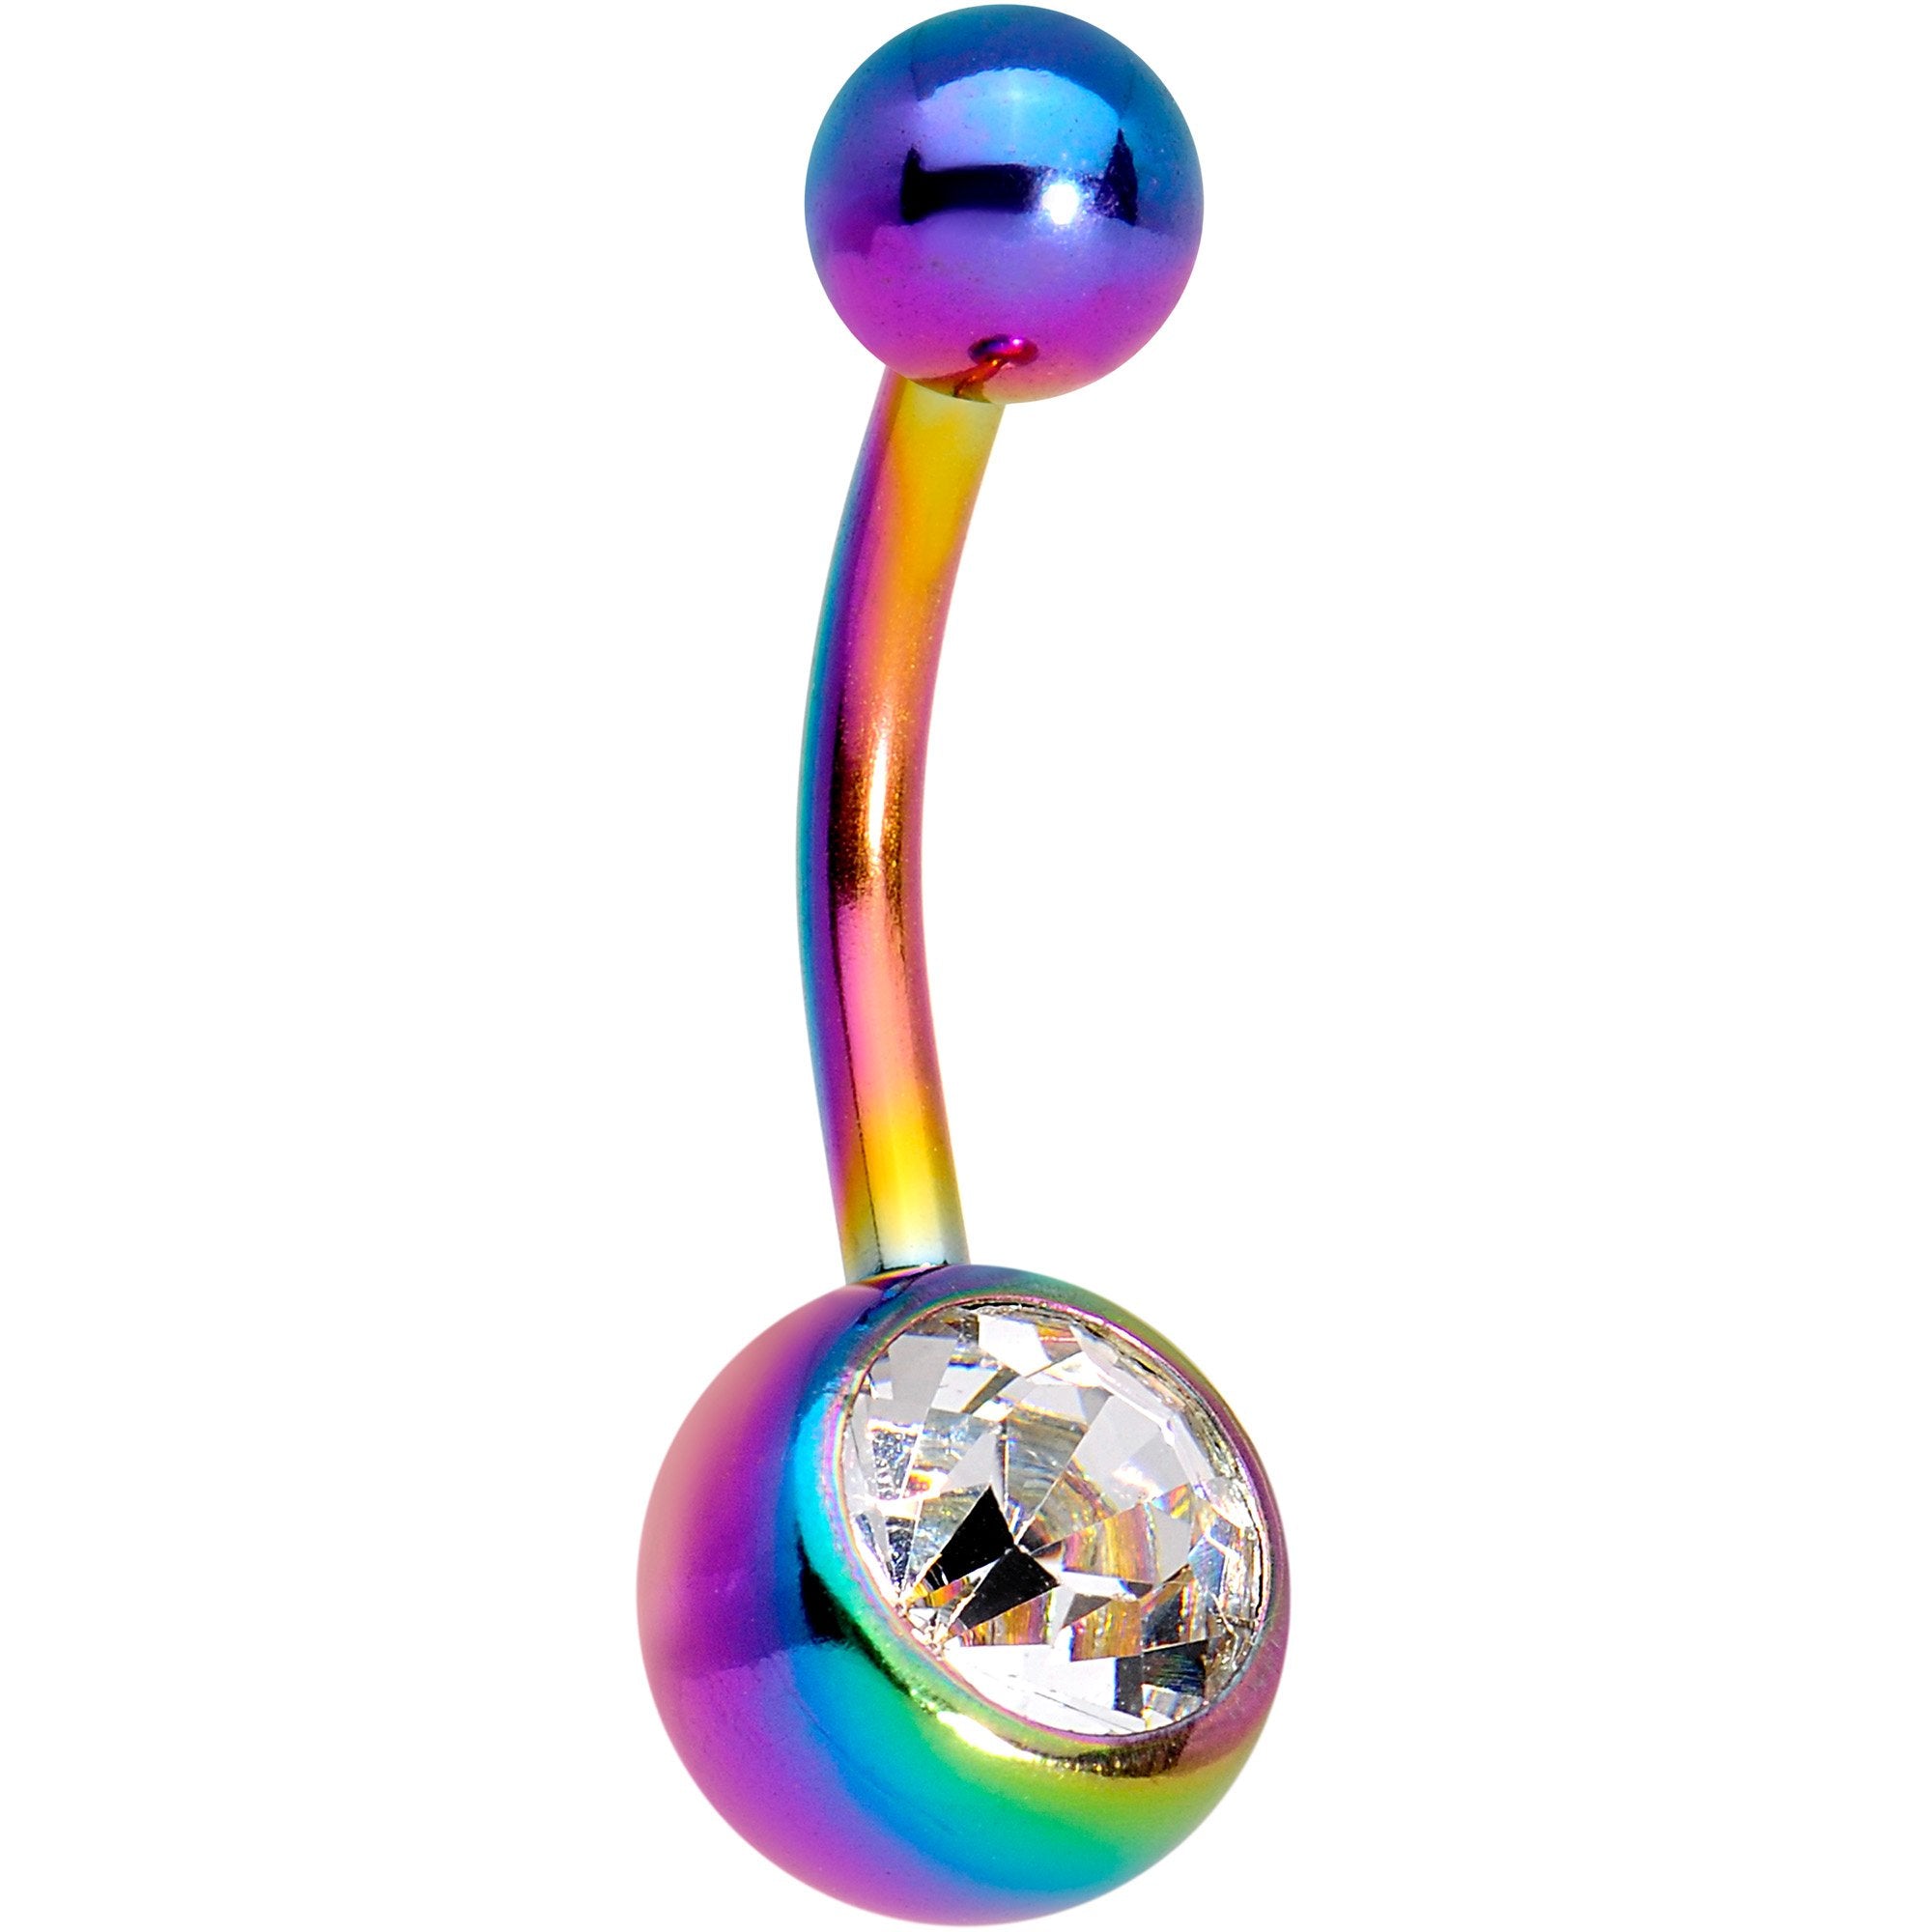 Clear Gem Multi Color Anodized Titanium Belly Ring Set of 5